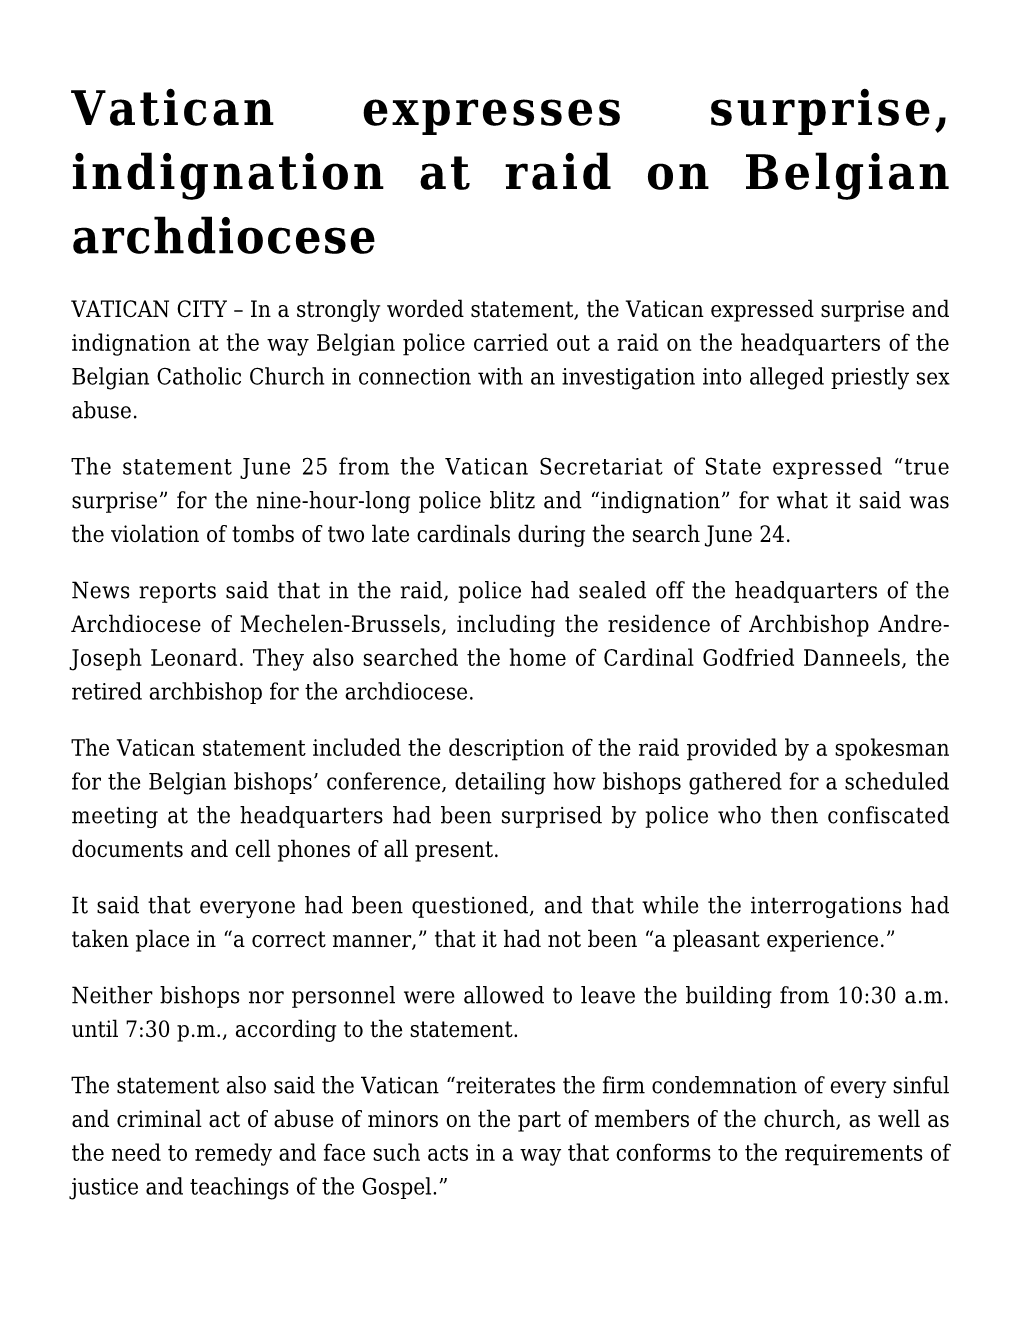 Vatican Expresses Surprise, Indignation at Raid on Belgian Archdiocese